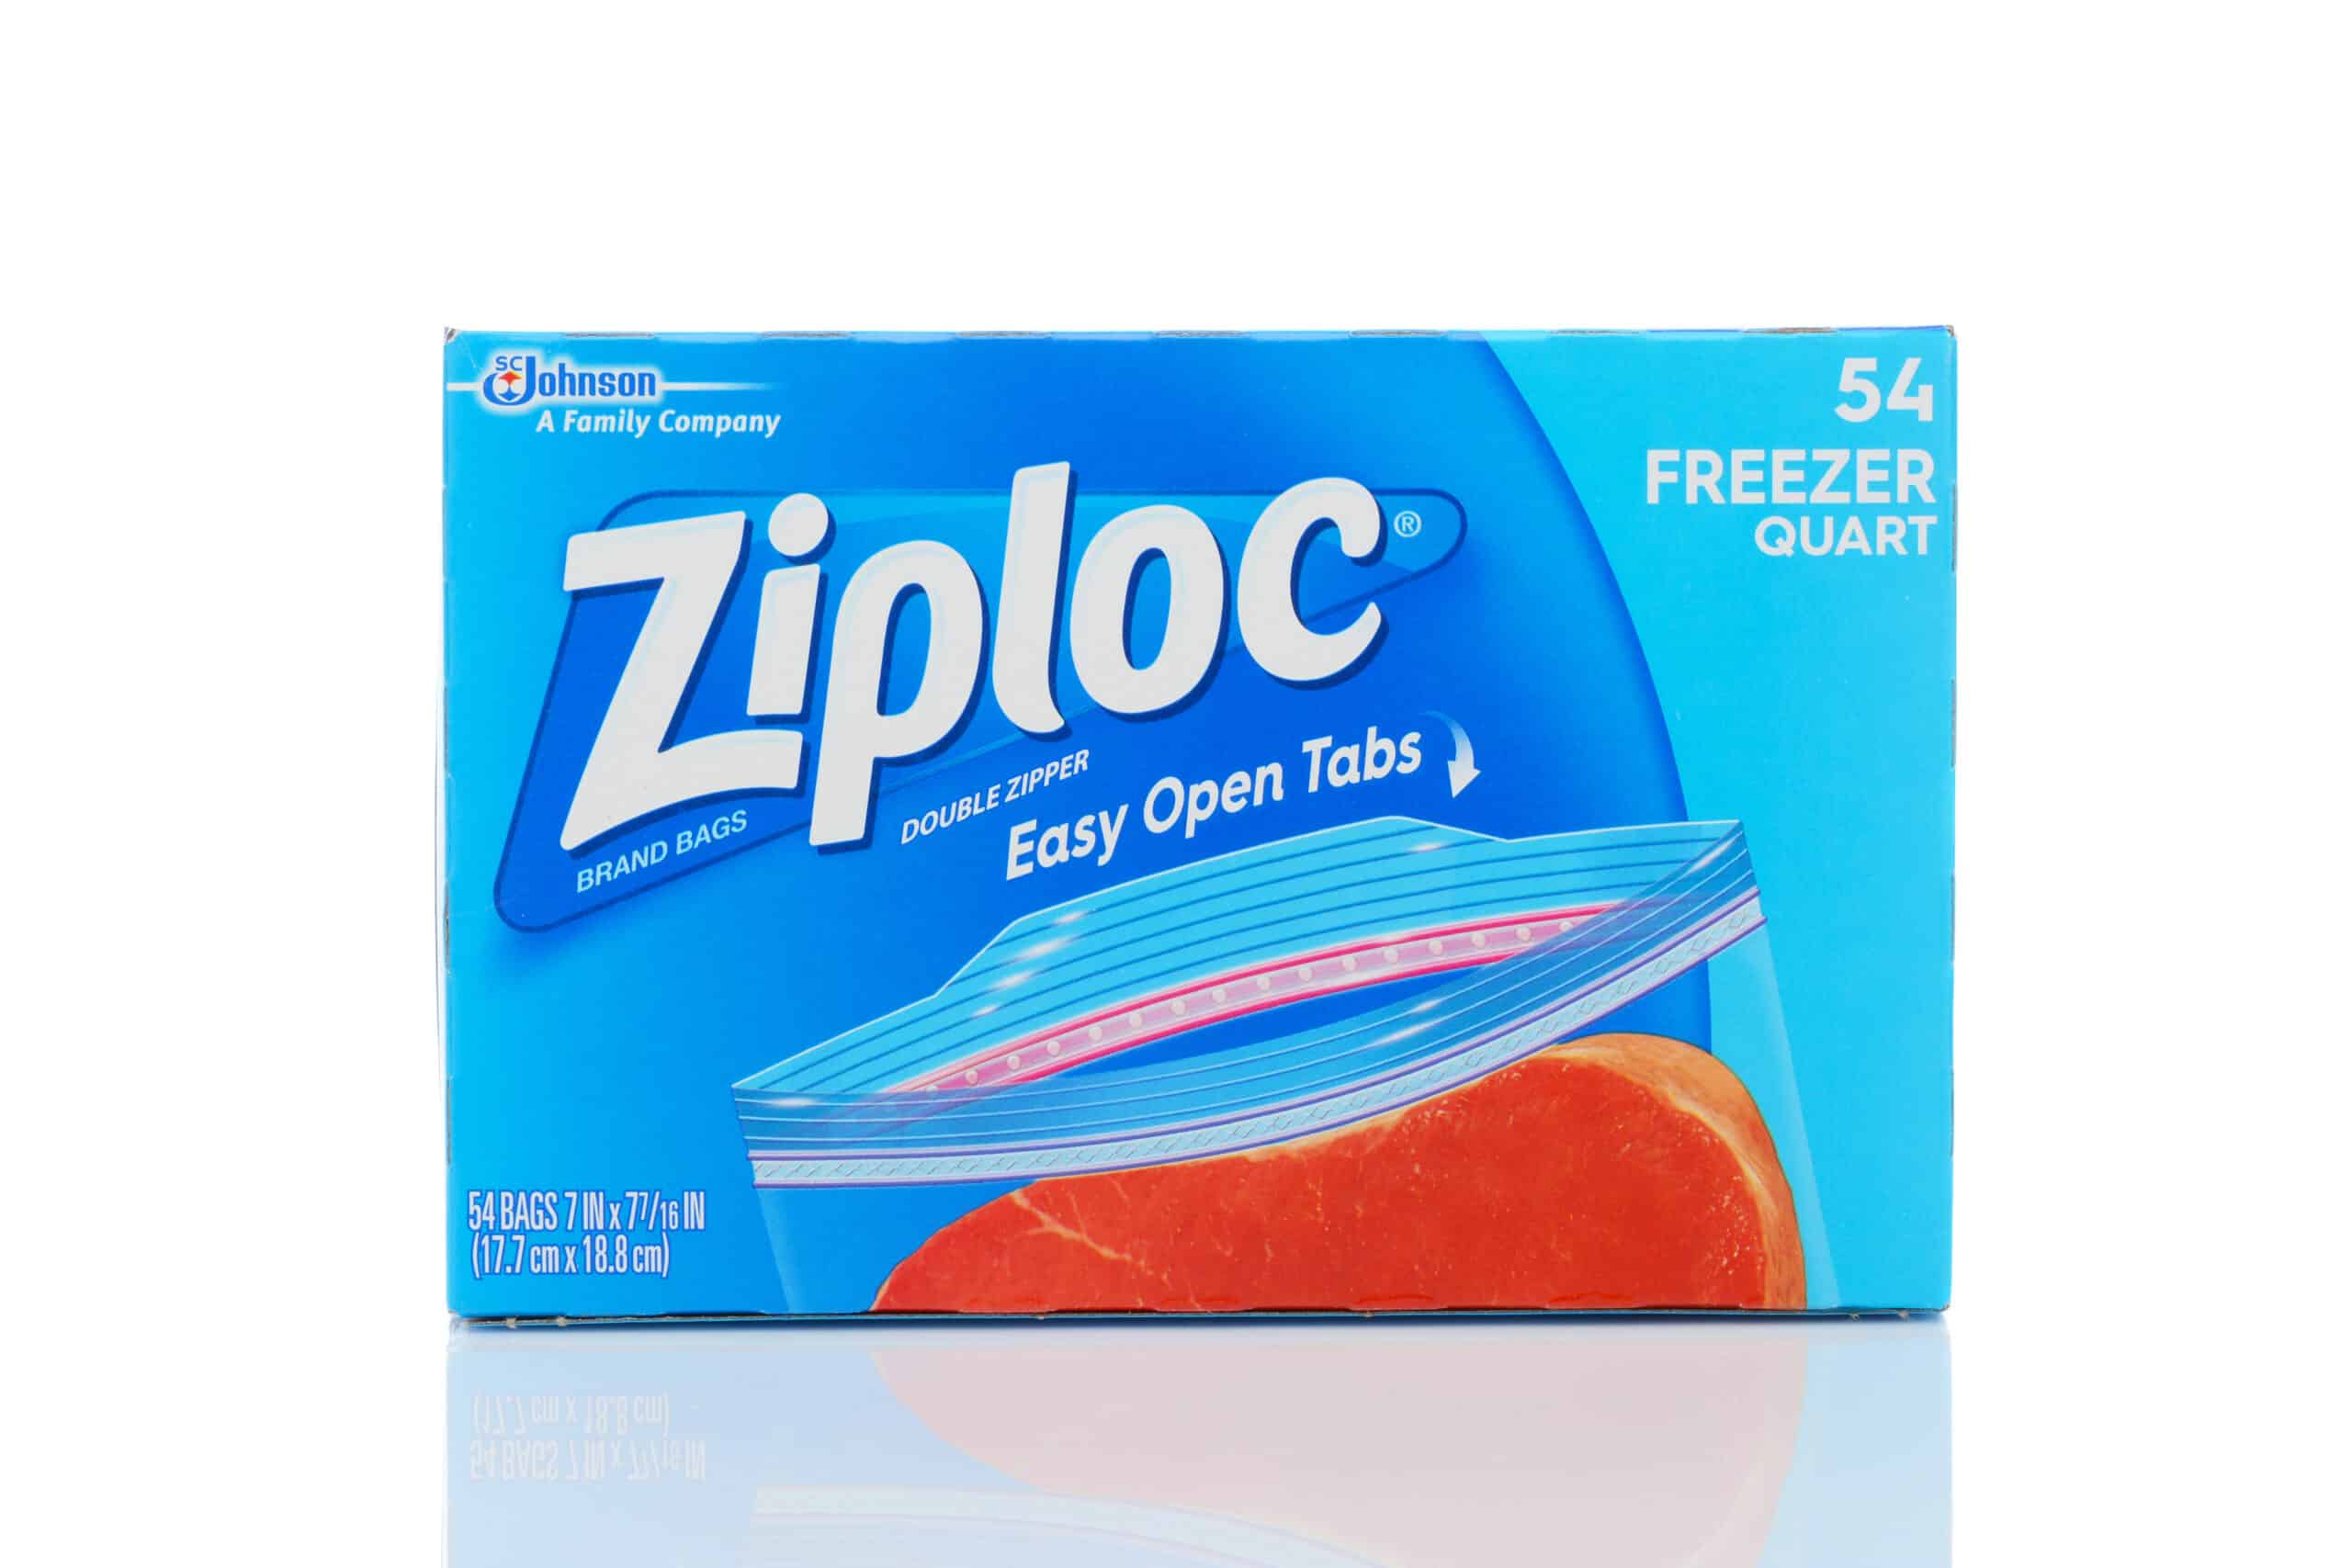 <p>One person suggested “Ziploc bags. Usually, I bring a couple of gallon-sized and several liter-sized bags when traveling, especially with kids! Great for putting snacks in for long bus/train/plane rides, carrying trash in until you can get to a trash can, and suitcase organization (e.g., dirty undies go in a Ziploc).”</p>